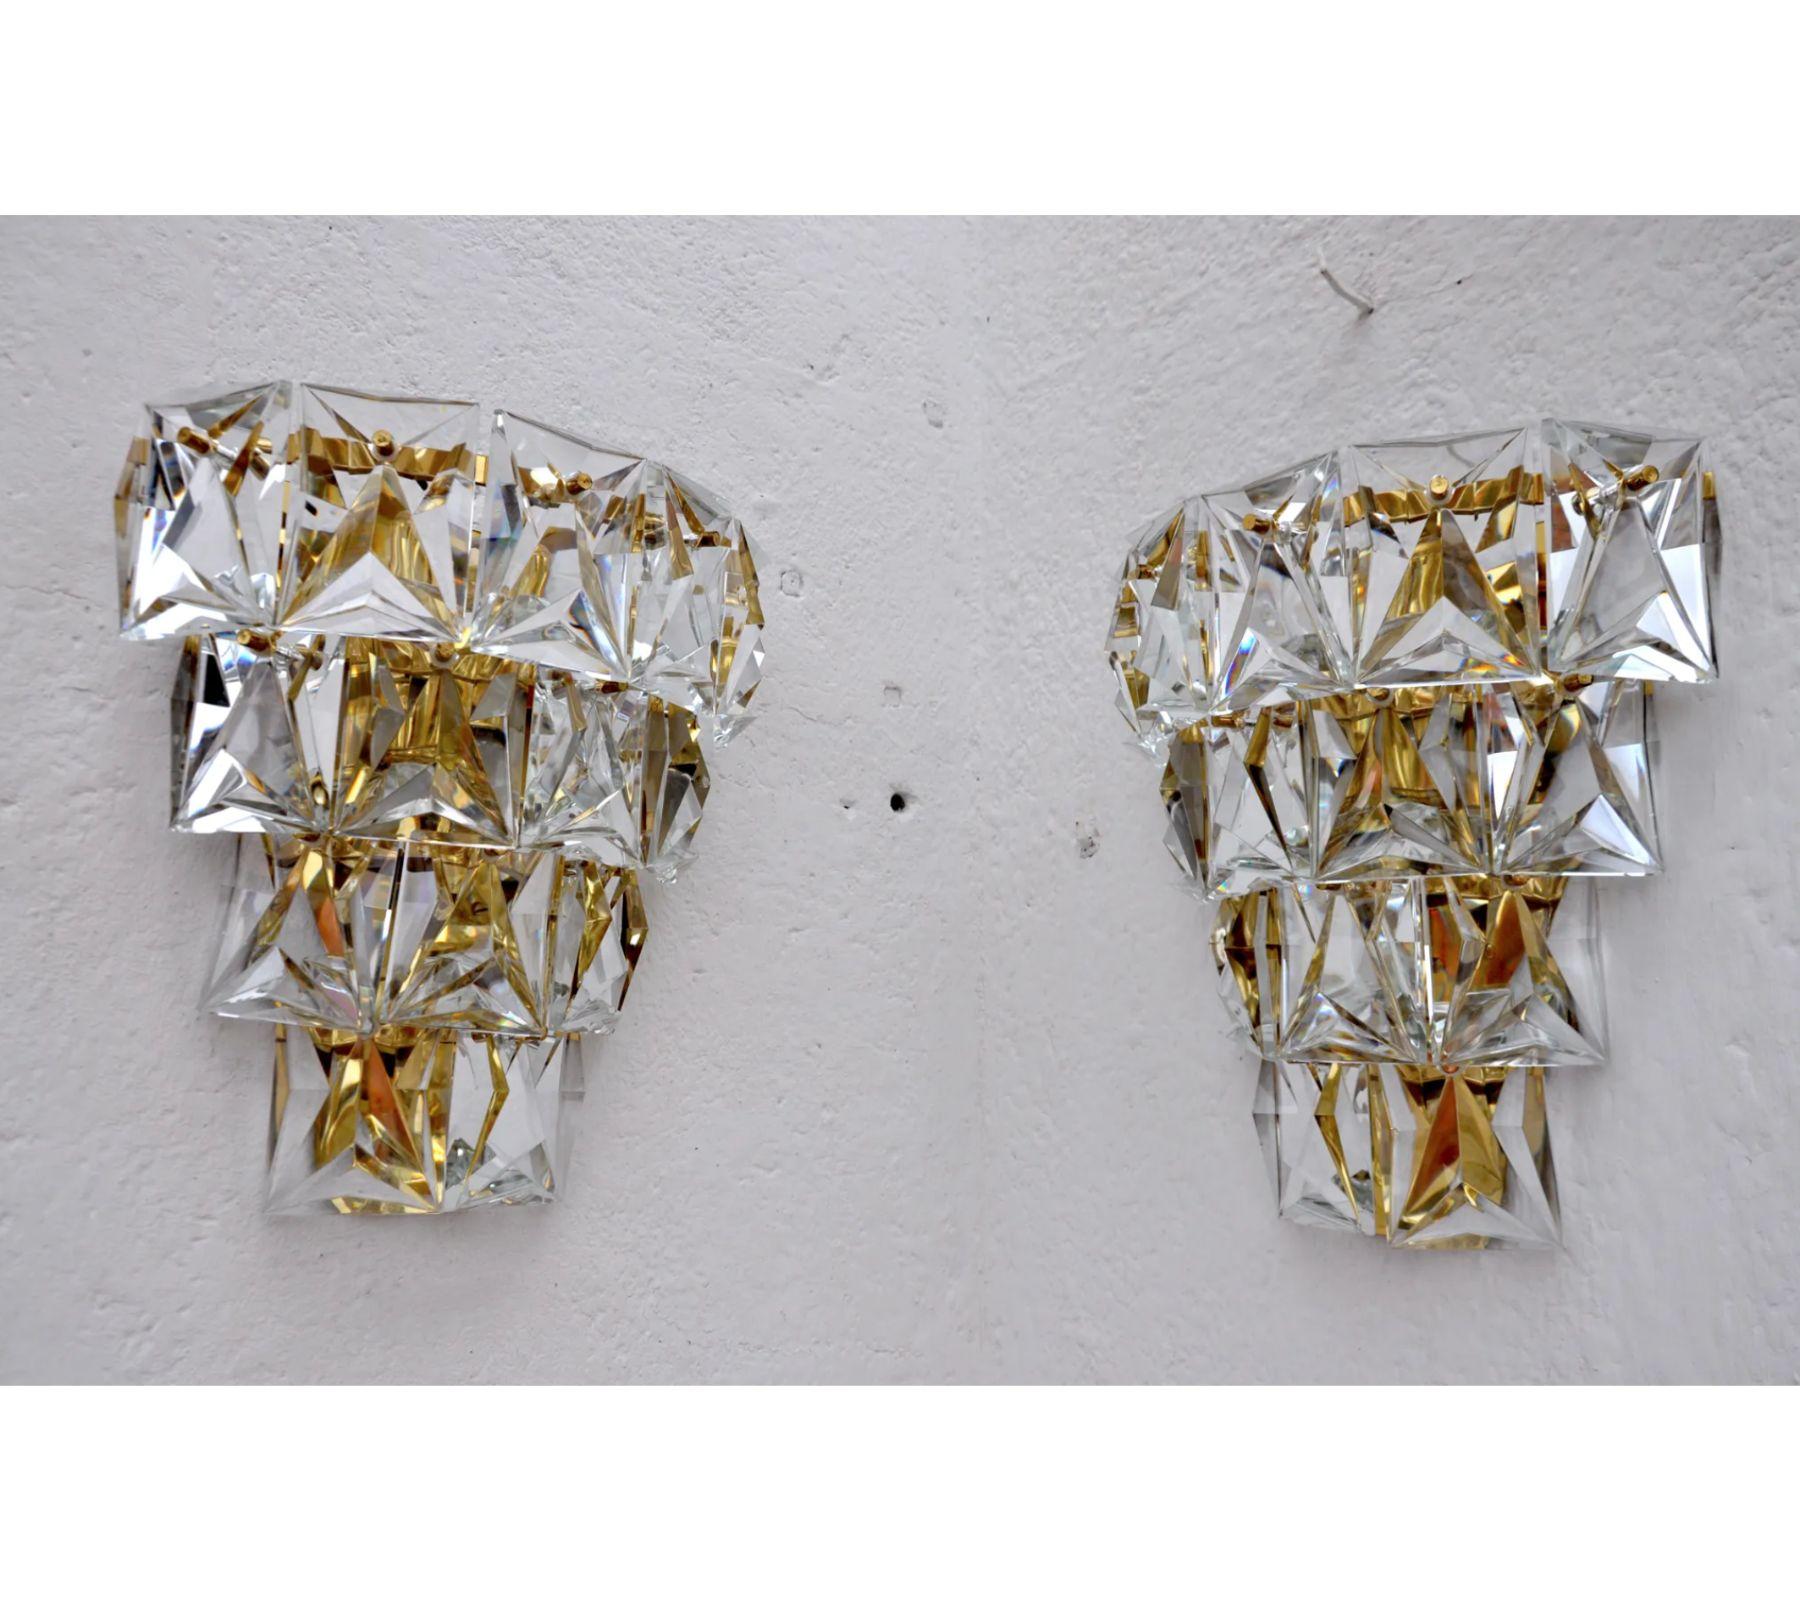 Stunning pair of kinkeldey wall lamp, mid-century German design with its 14 crystals in perfect condition. Beautiful pair of lamp.
- Sconce: Hardwired x 250V.